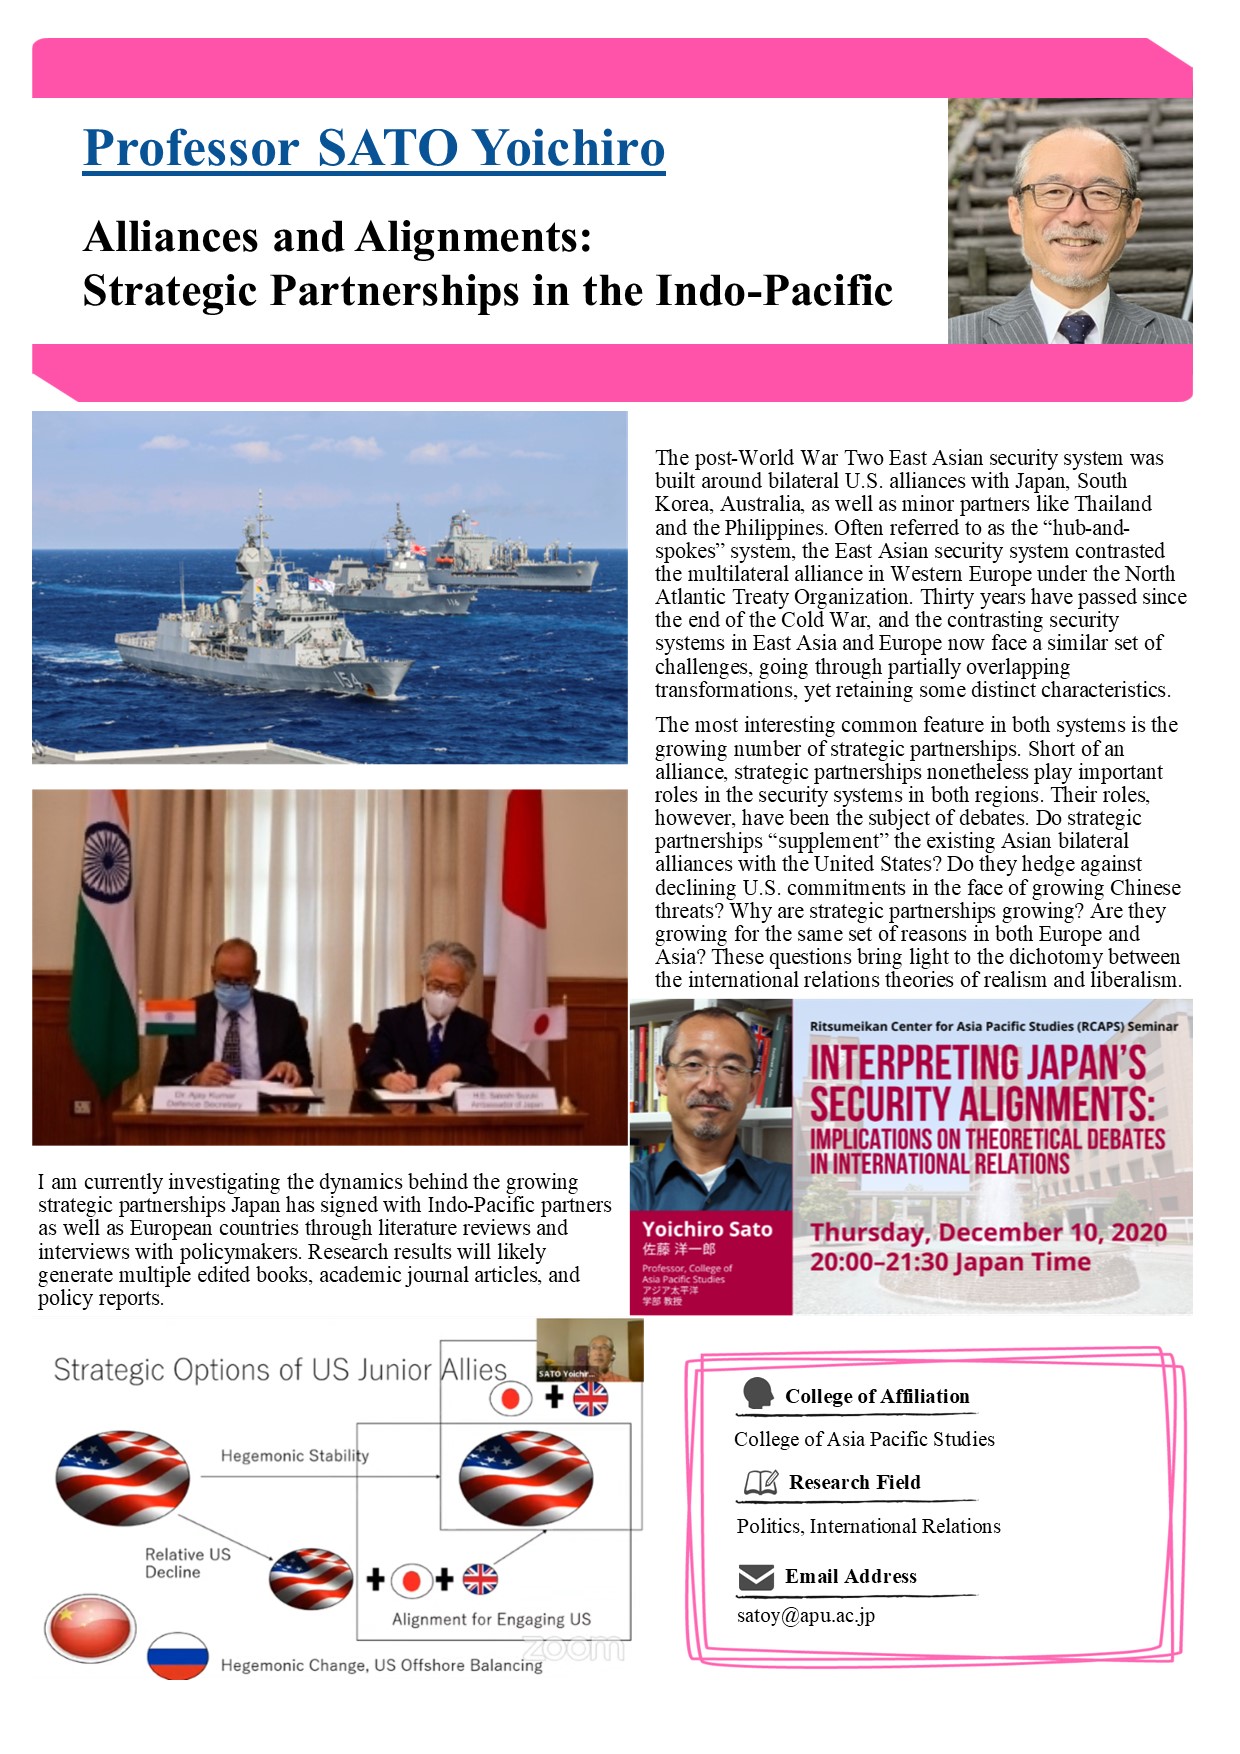 Alliances and Alignments: Strategic Partnerships in the Indo-Pacific